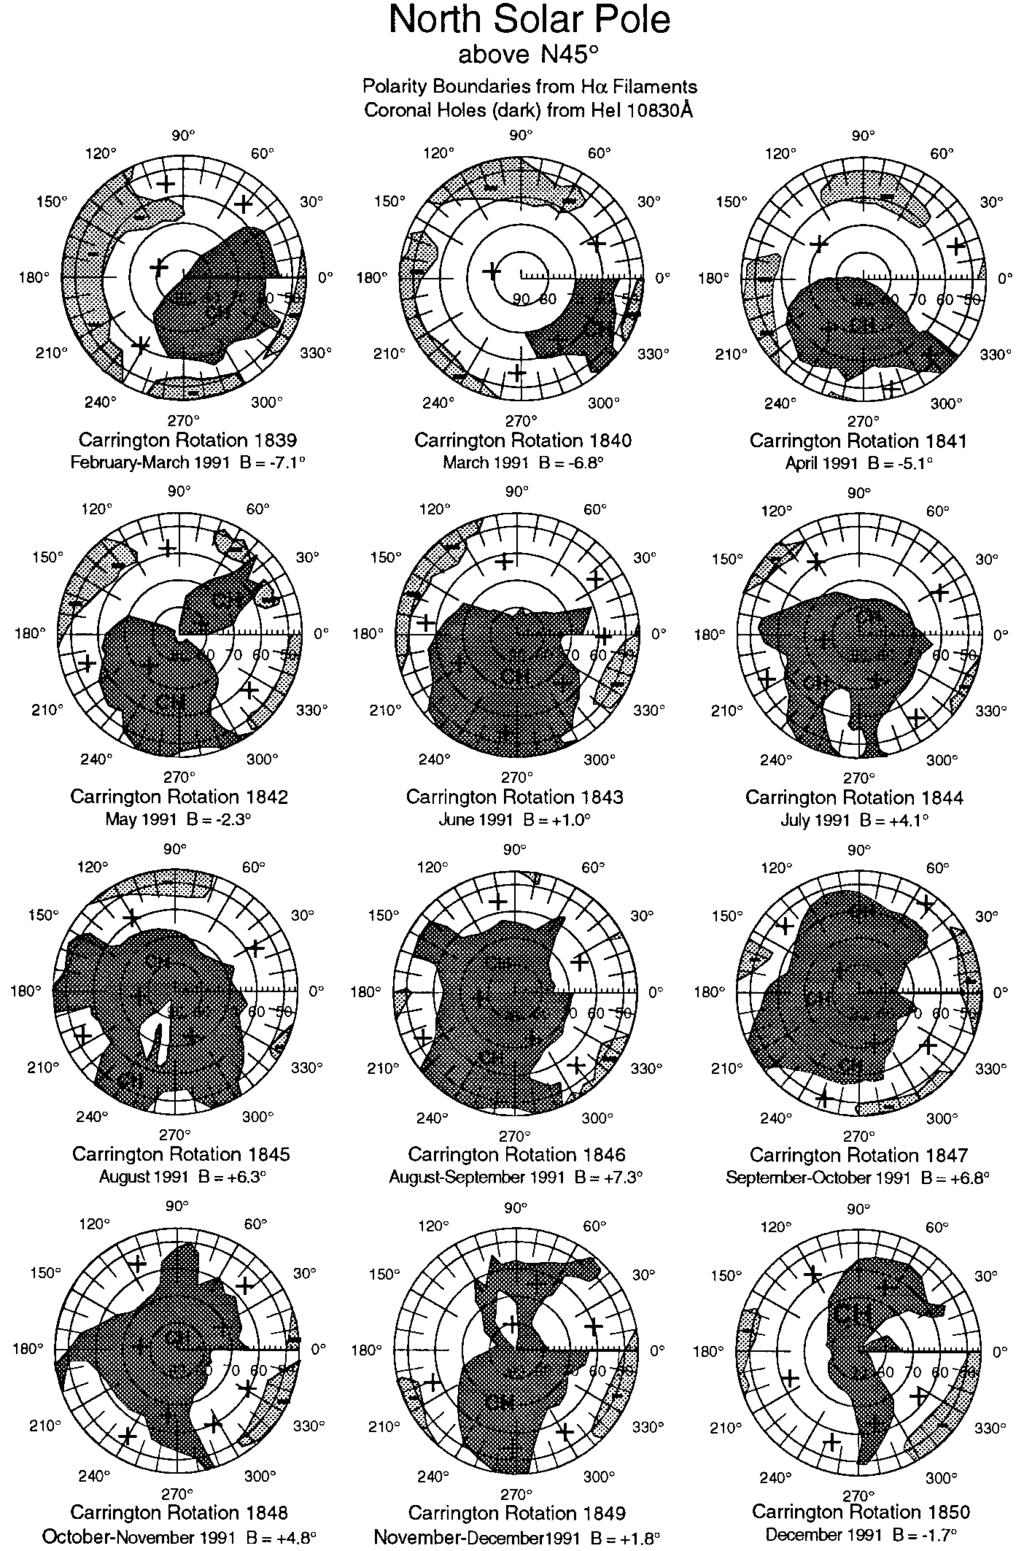 384 P. FOX, P. McINTOSH, AND P. R. WILSON Figure 3c. Figure 3a c. A complete sequence of northern-hemisphere polar plots from CRs 1815 to 1861 (cycle 22) is shown.